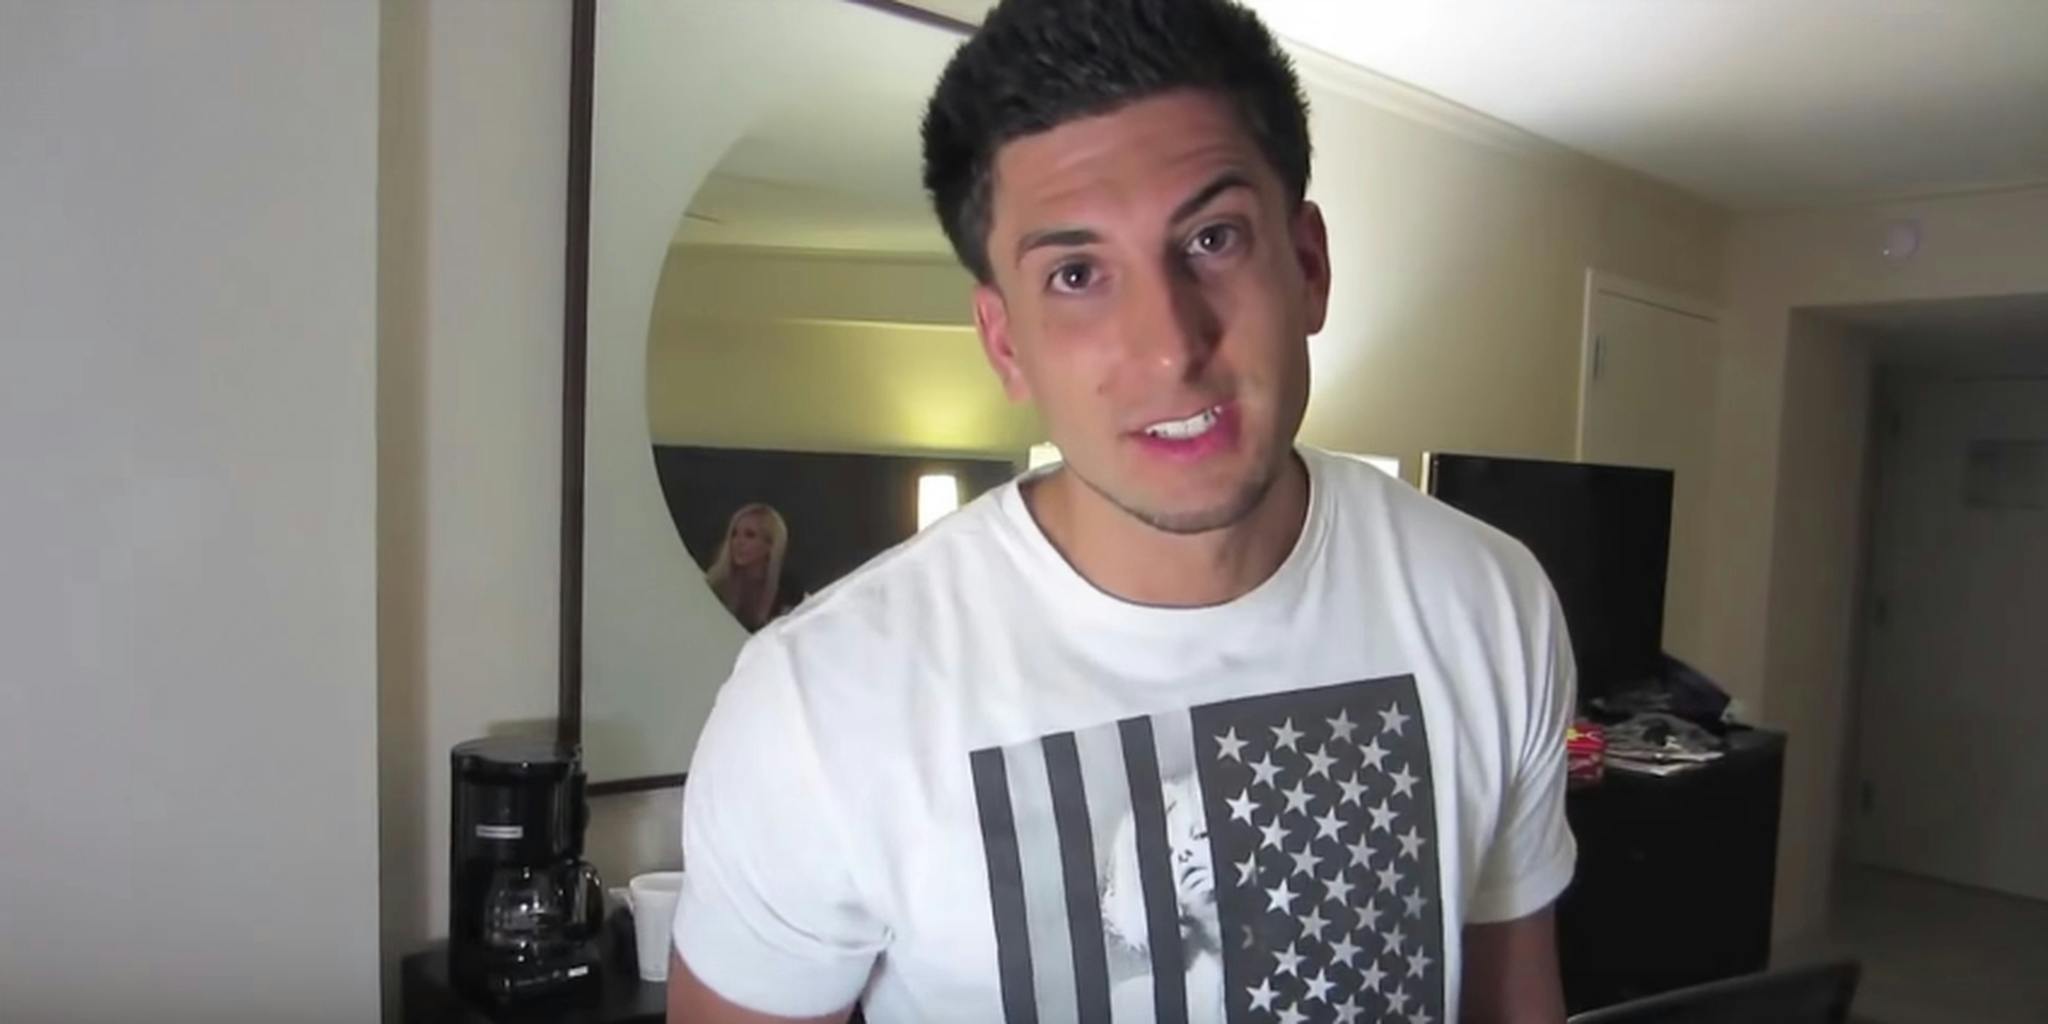 YouTube star Jesse Wellens turns to Twitter to help find missing mom.